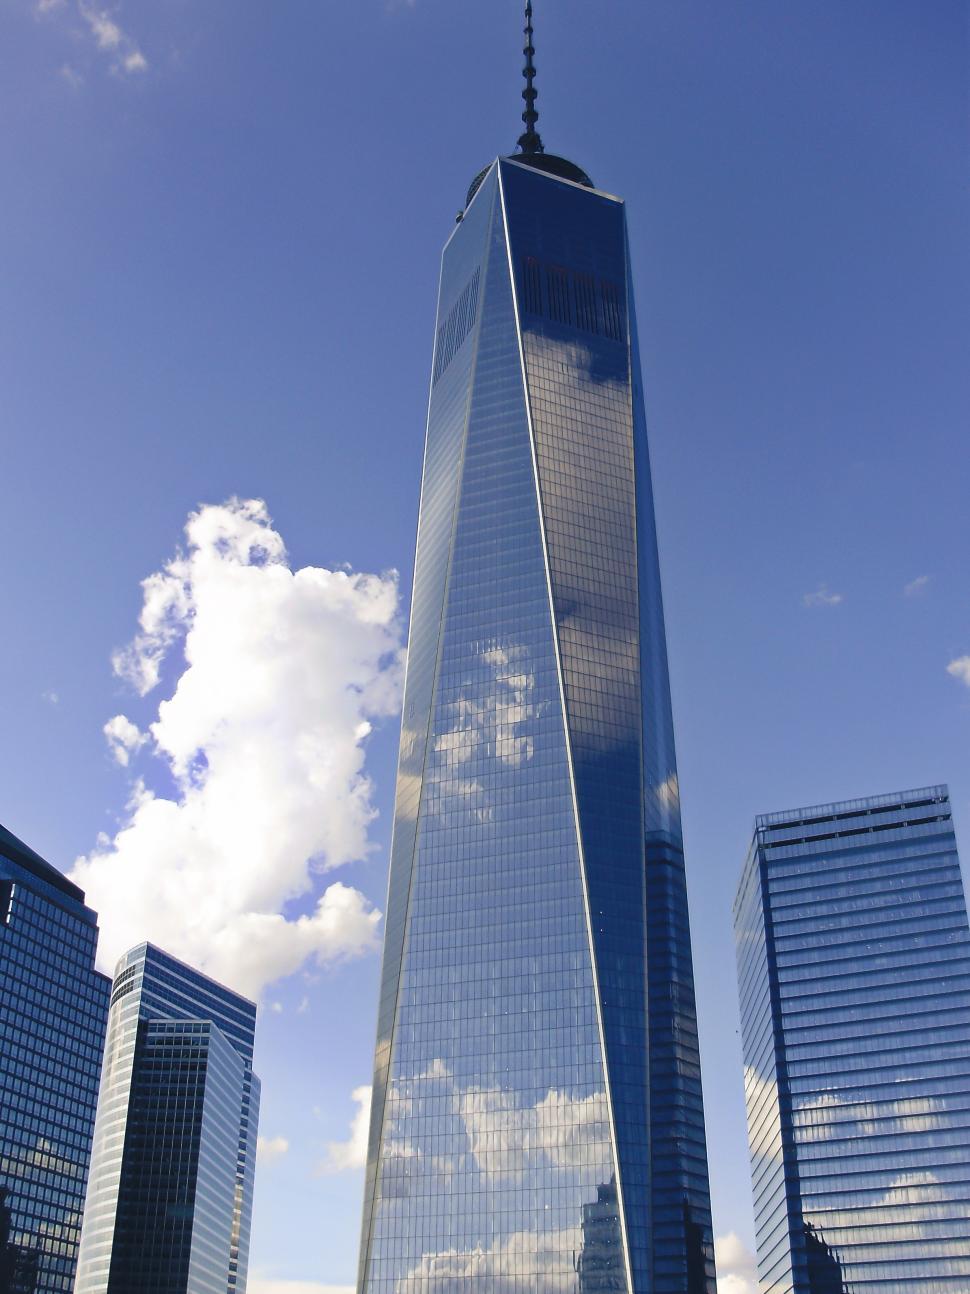 Free Image of A tall glass building with a blue sky 